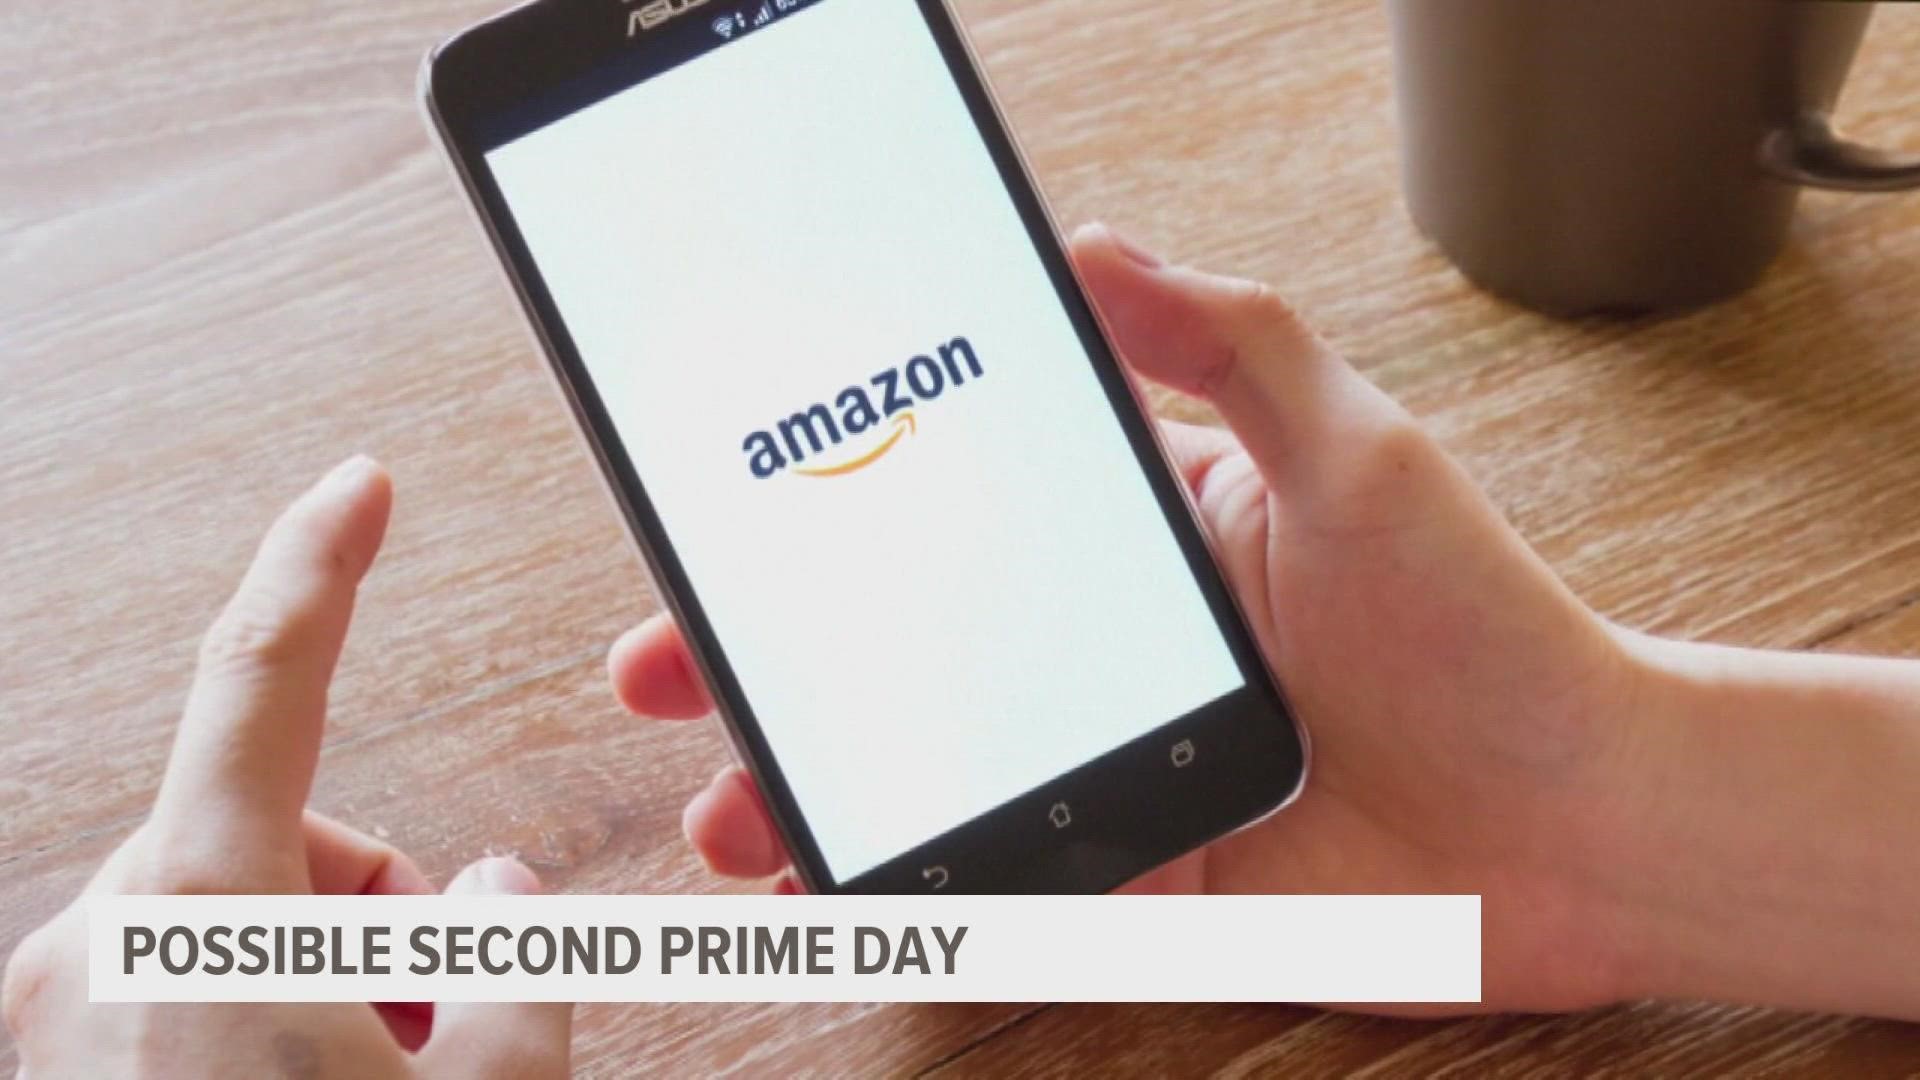 According to Business Insider, Amazon is planning a two-day mega sale set for this fall. Last month, shoppers bought more than $1.7 billion in items on Prime Day.